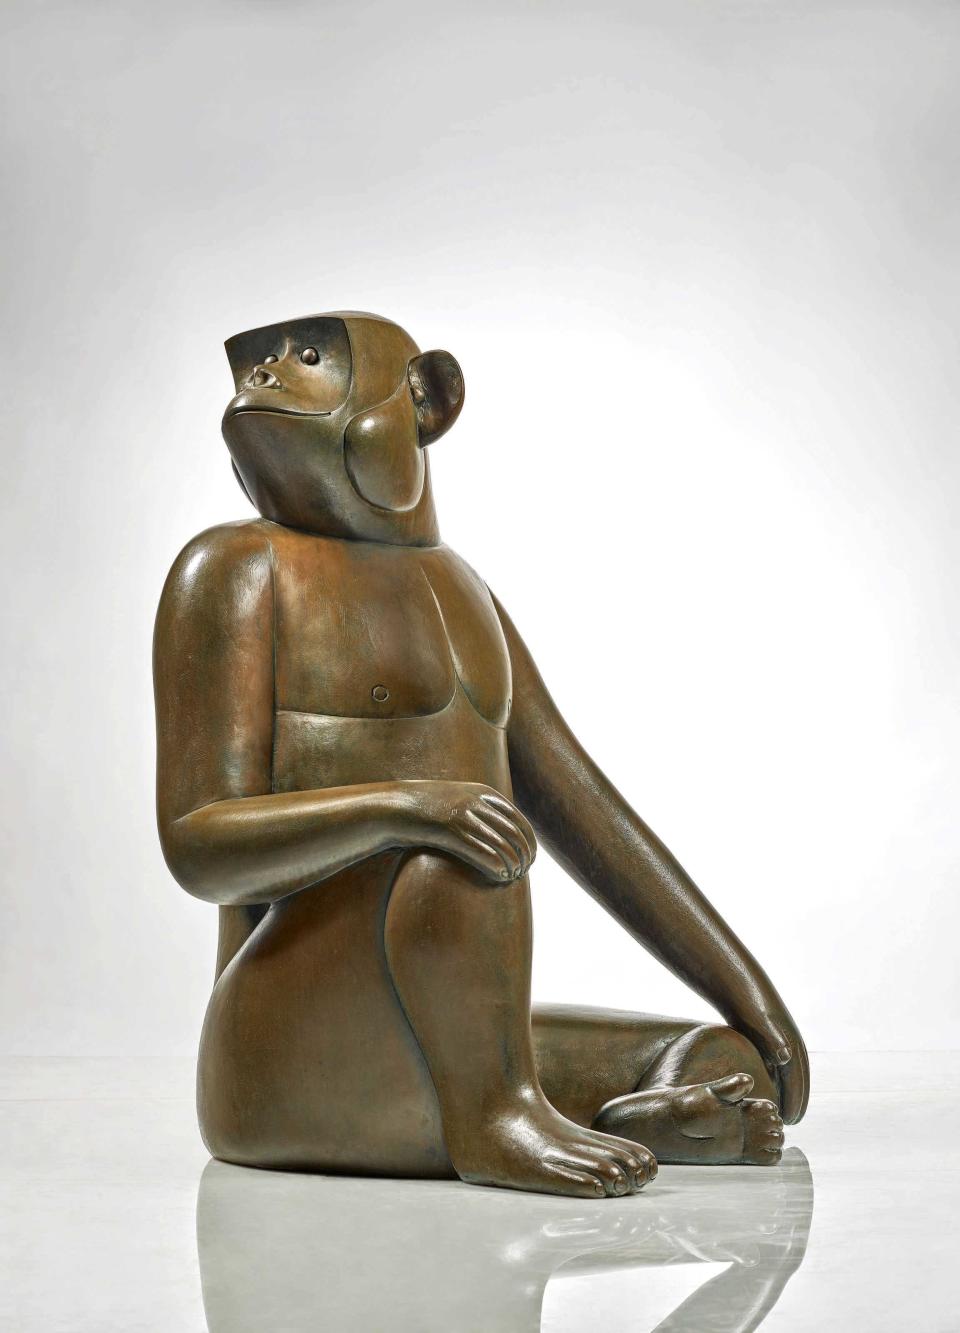 At Sotheby's, Claude Lalanne’s Singe Avisé (Grand), a monumental bronze monkey statue created in 2005, fetched $2.2 million—far exceeding its $1.5 million estimate.